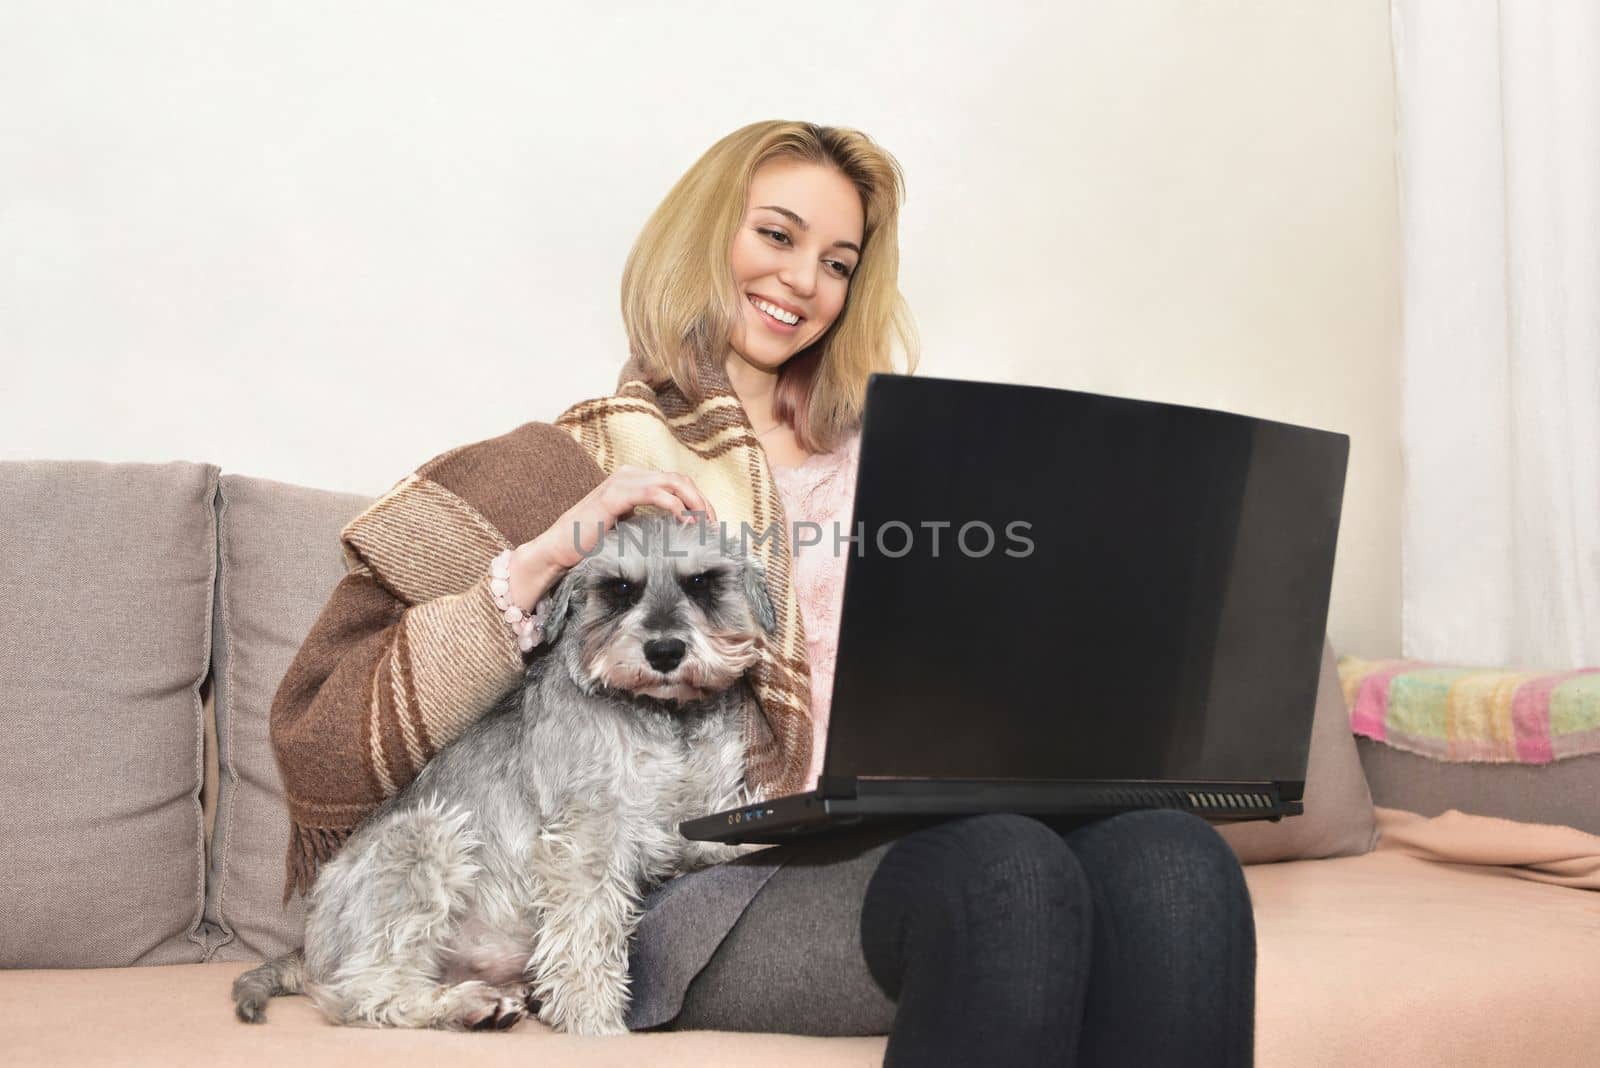 Gray shaggy dog is sitting on the couch in the arms of a girl who is working on a laptop. by Nickstock